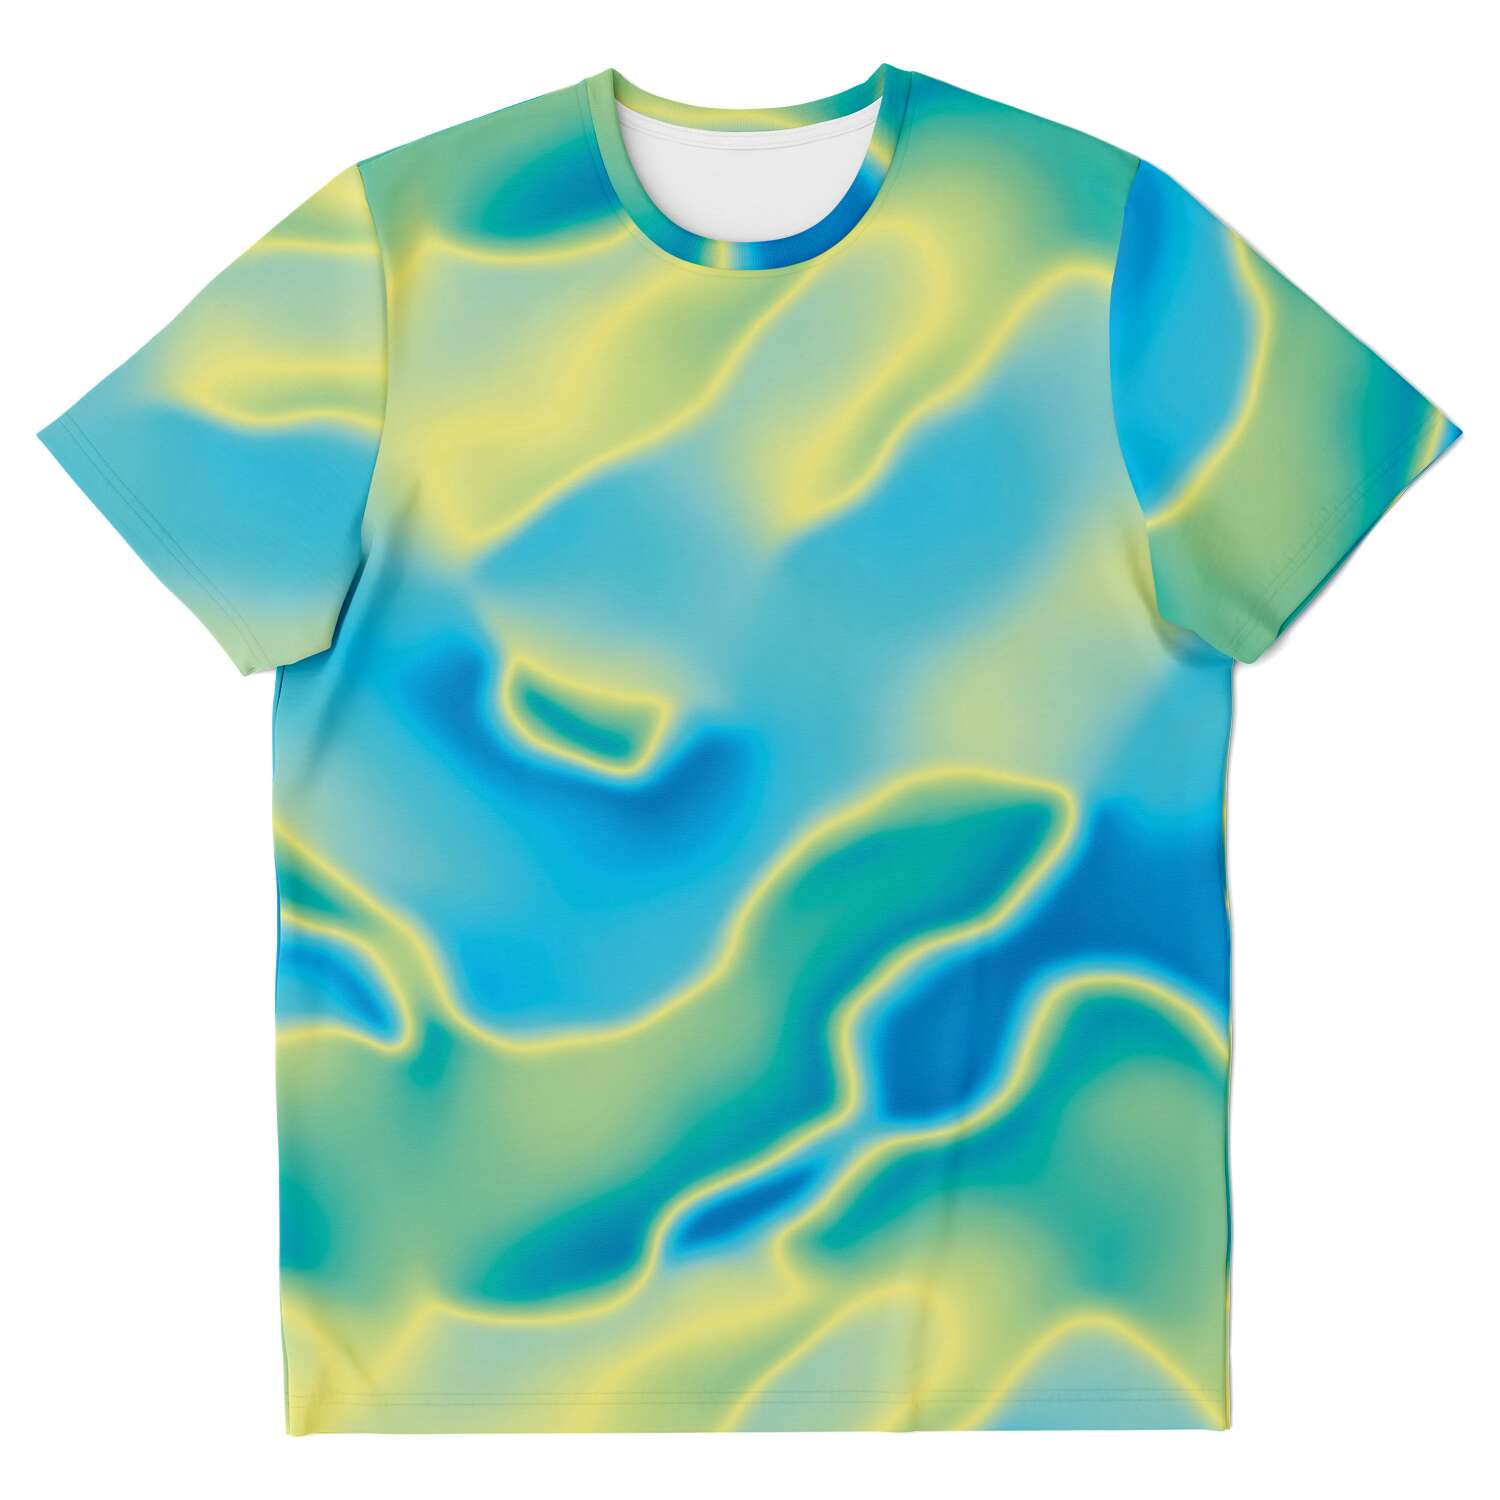 Blue Mint Green Abstract Holographic Iridescence T-Shirt - kayzers